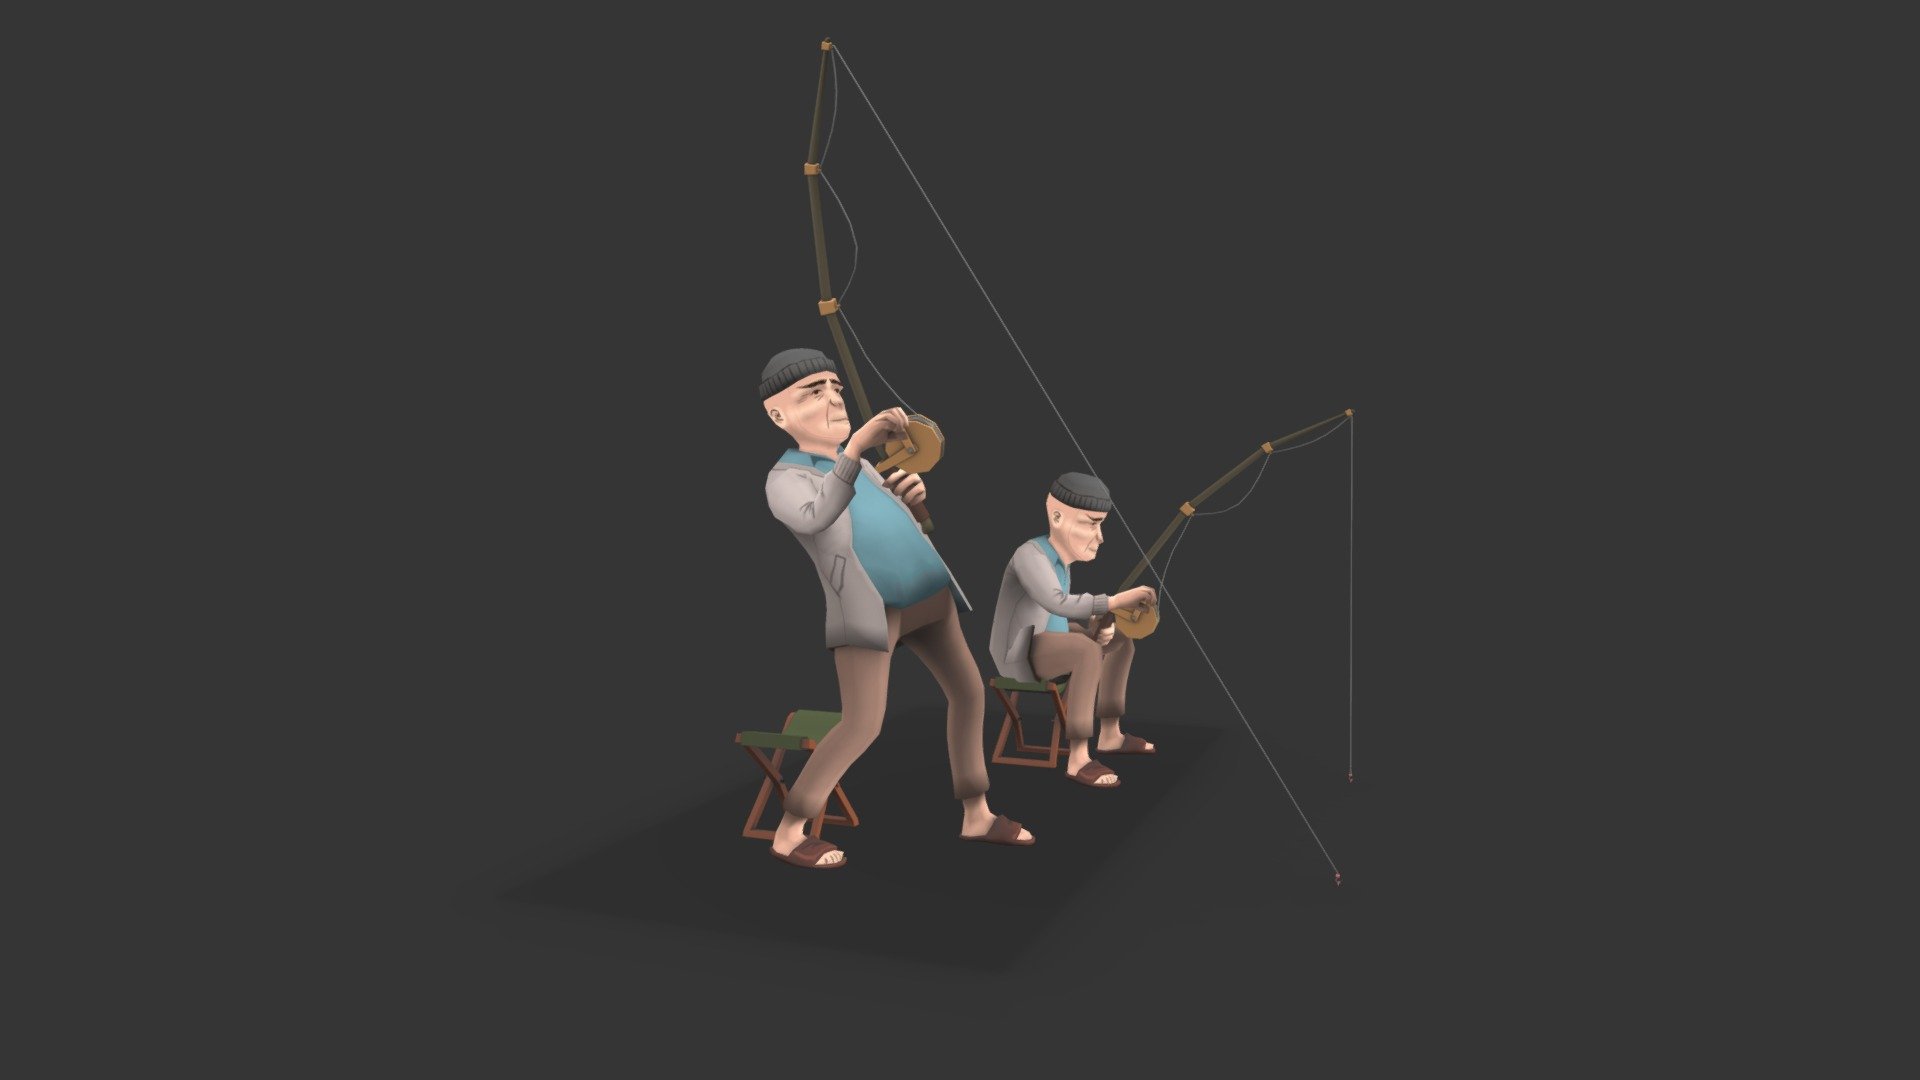 3D model in fbx format

2048 texture

rigged with mixamo and corrected by hand,

compatible with mixamo animation

compatible with Unity generic/ humanoid rig

Comes with blend file with RIG - Fisherman Character Lowpoly rigged - Buy Royalty Free 3D model by mahrcheen 3d model